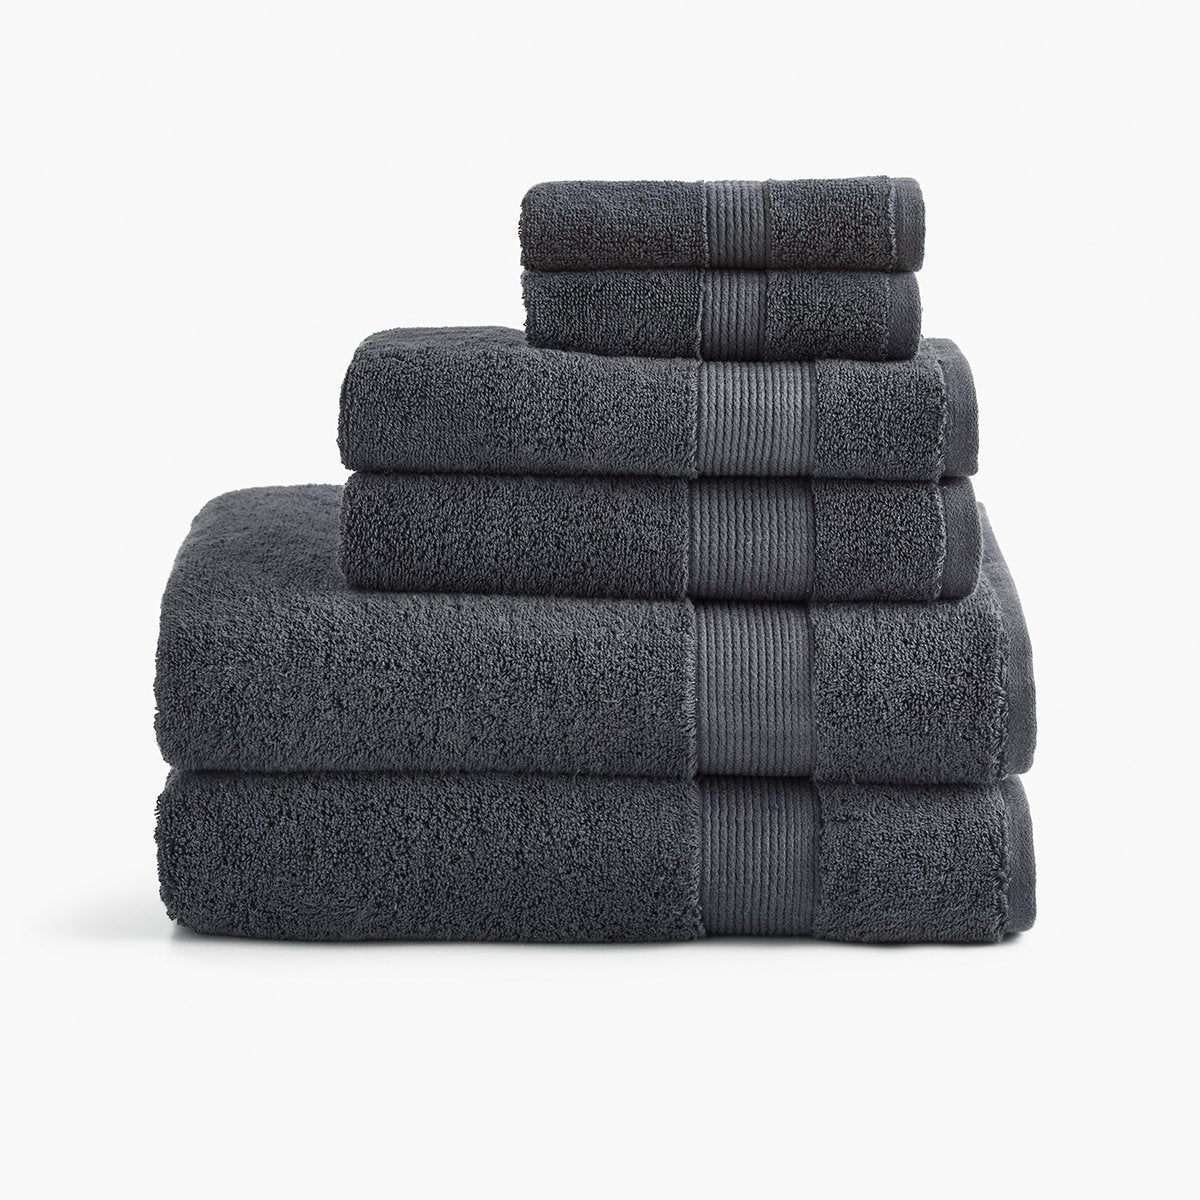 s Best-Selling Kitchen Towels Are on Sale for $8